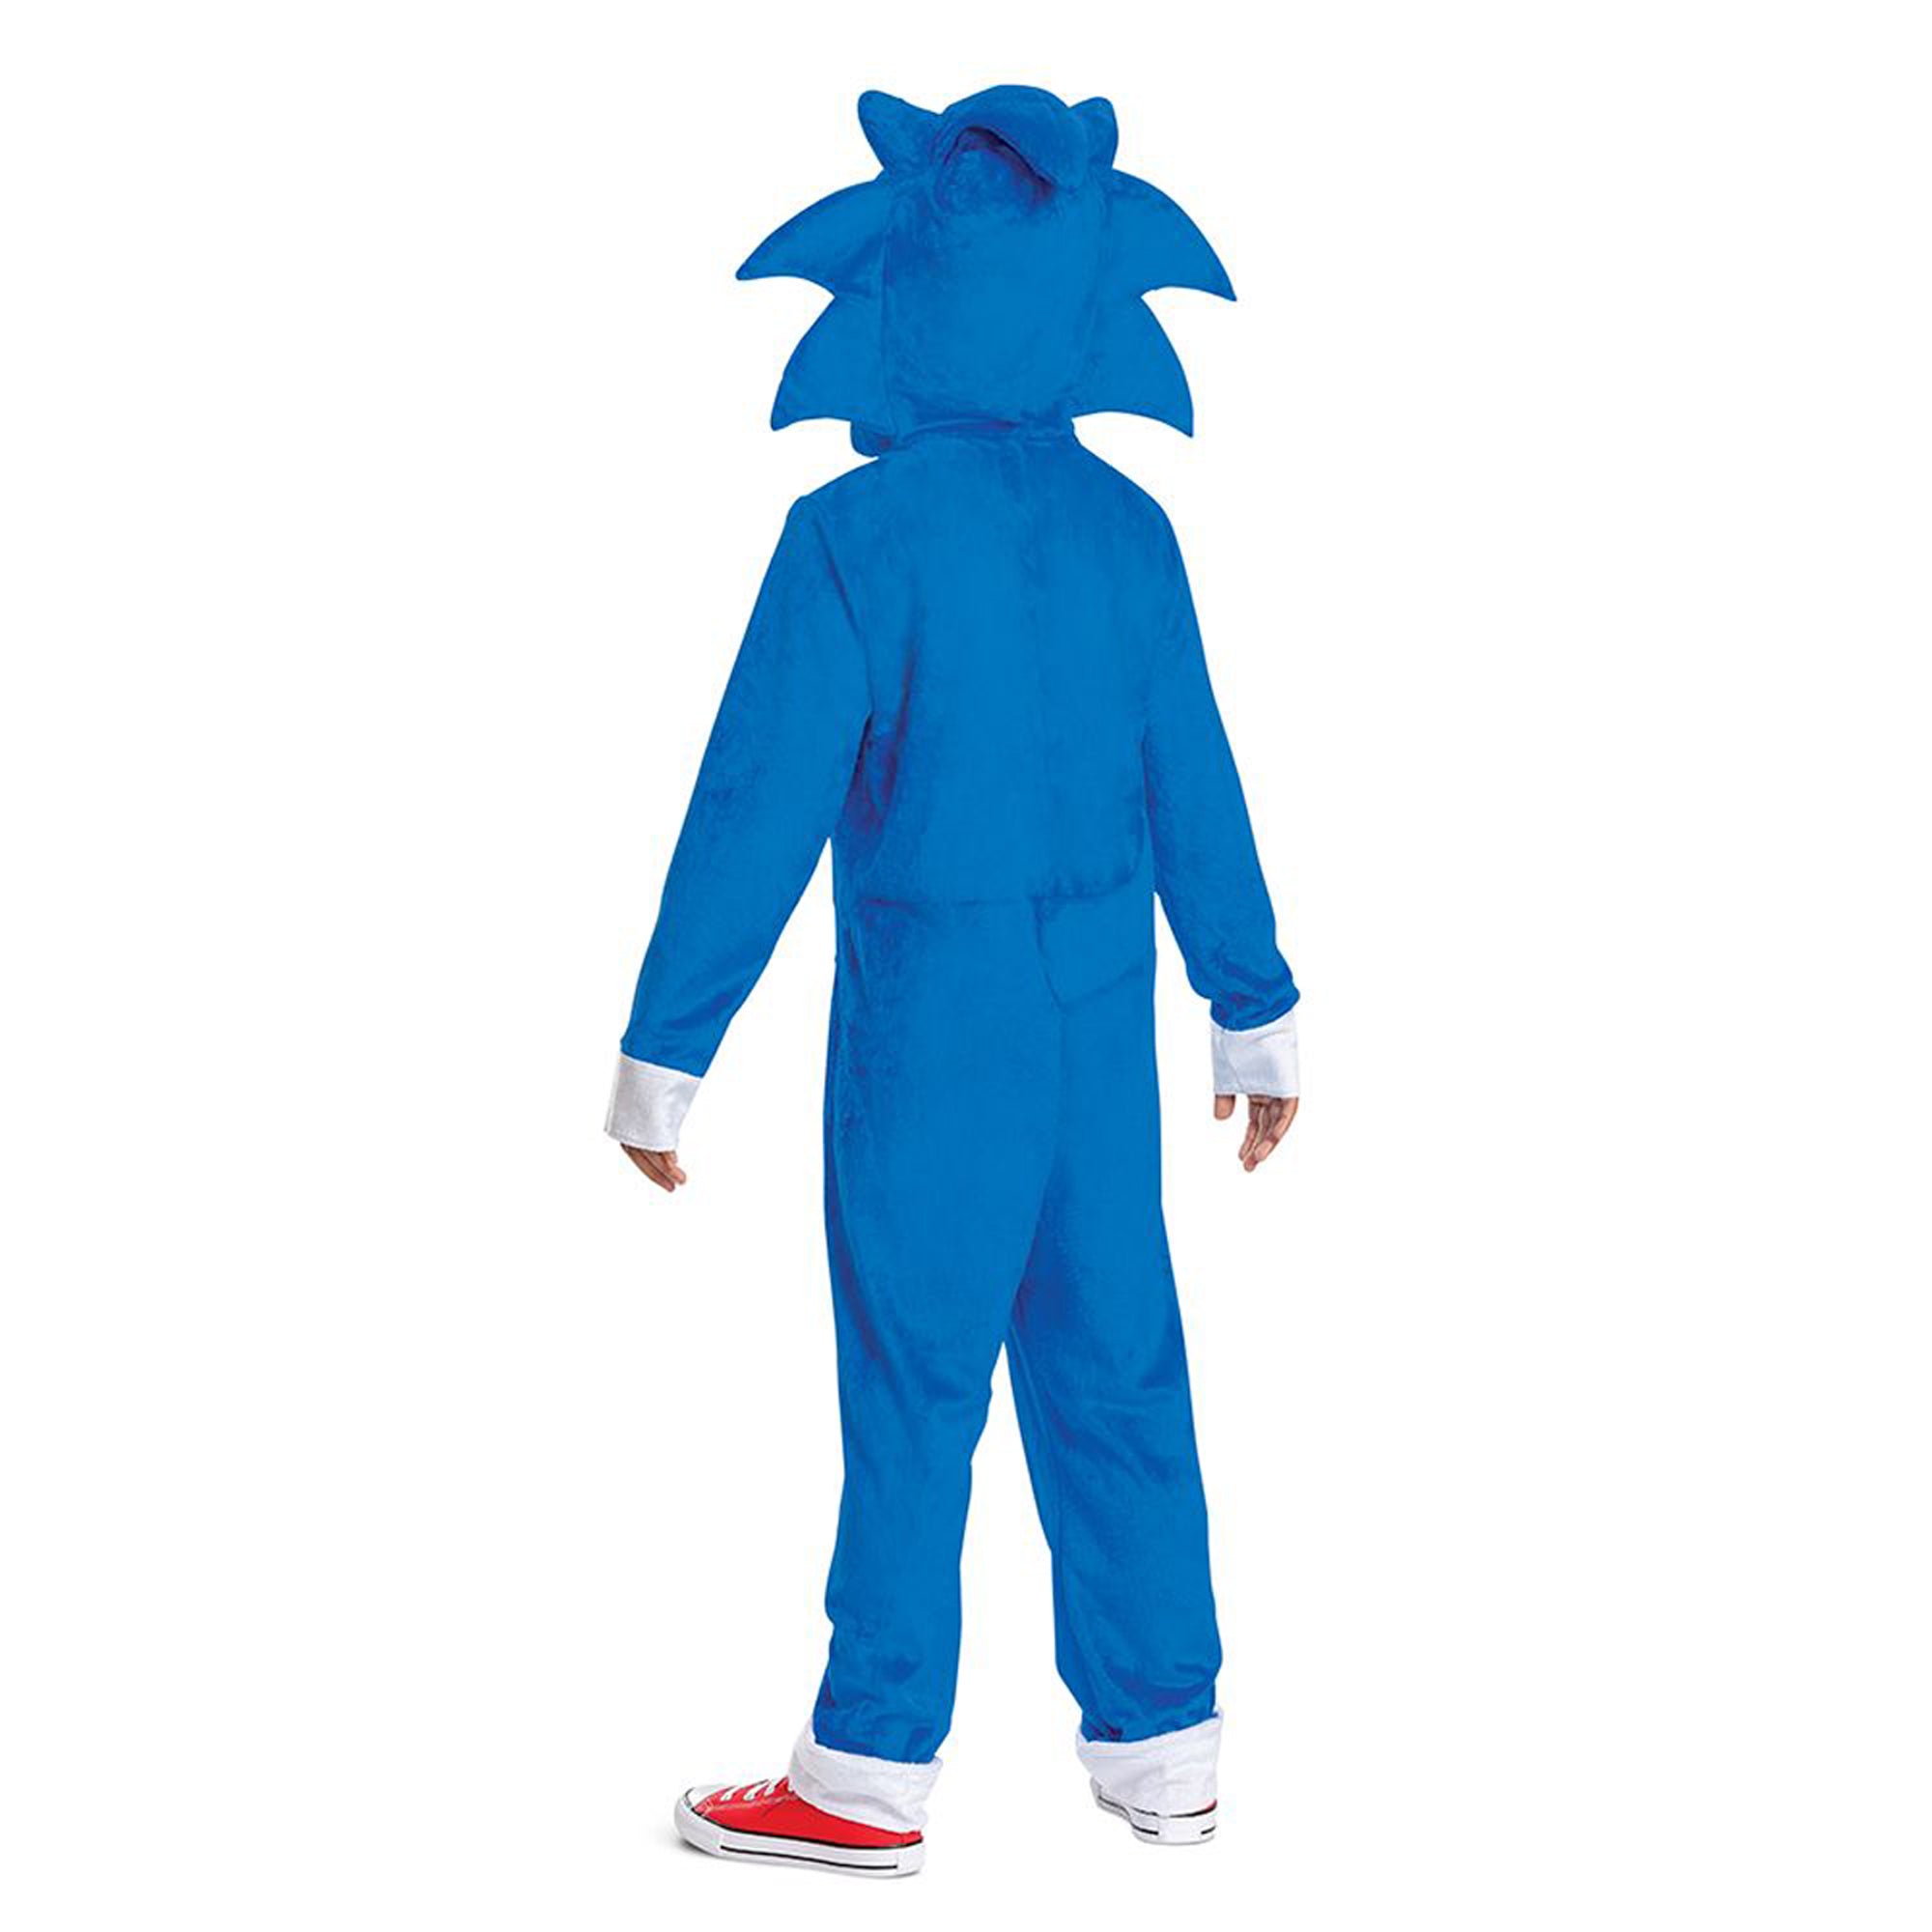 Sonic Classic Costume for Kids, Sonic the Hedgehog 2